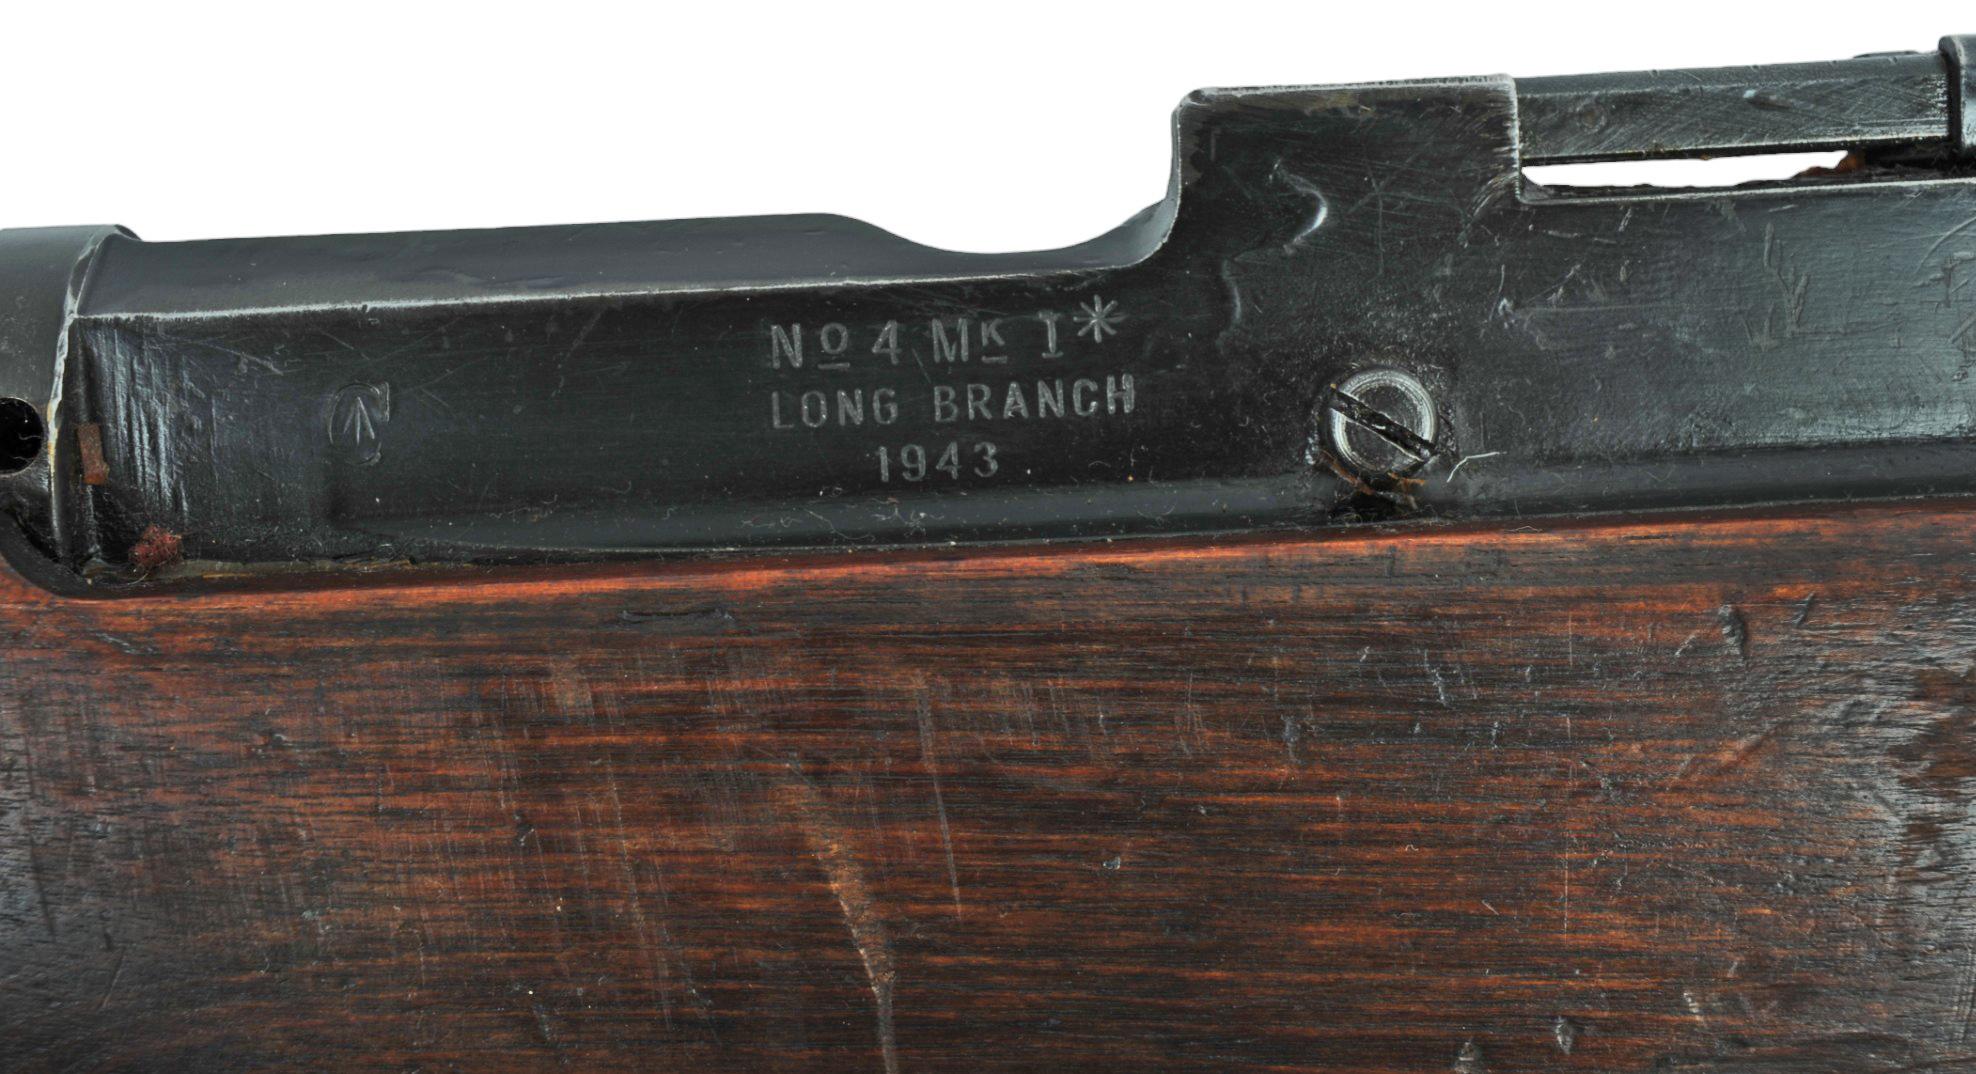 Canadian Military WWII era Long Branch #4 .303 Lee-Enfield Bolt-Action Rifle - FFL # 22L9672 (F1M1)